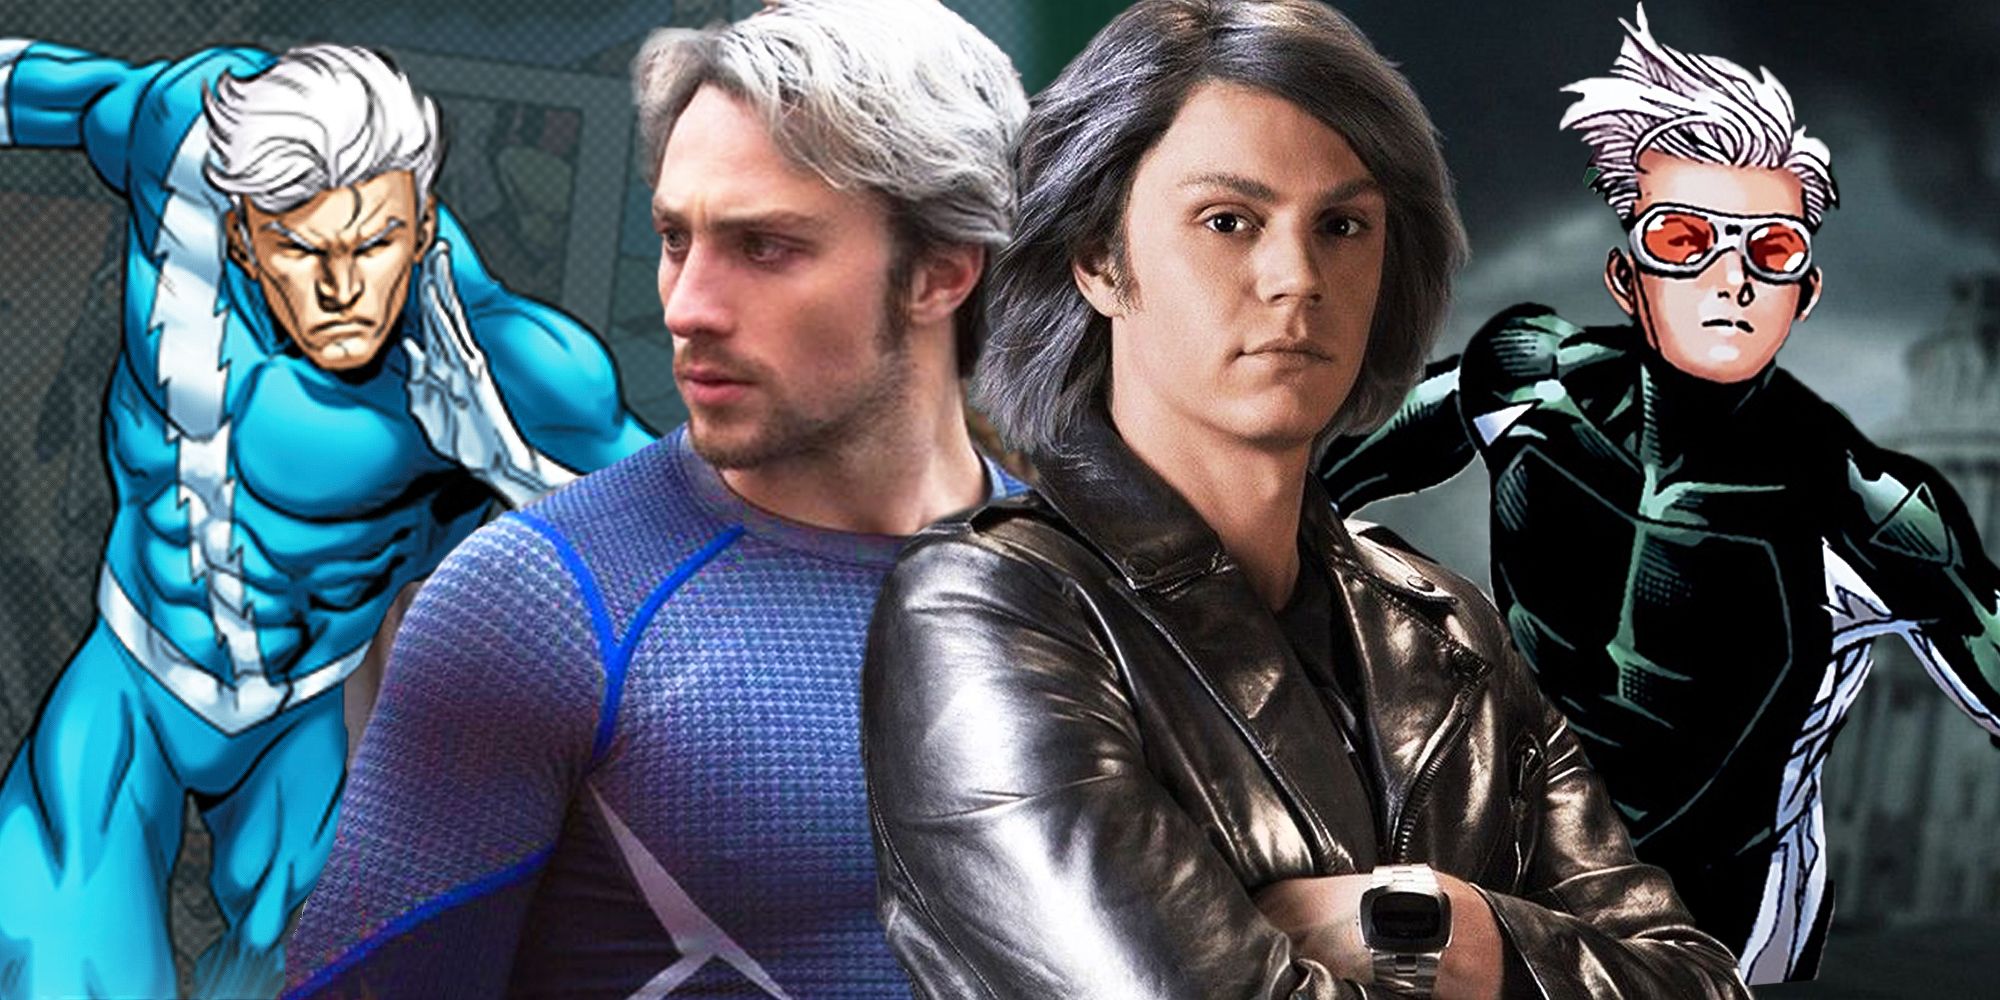 Aaron Taylor-Johnson as Quicksilver and Evan Peters as Speed In Avengers and X-Men